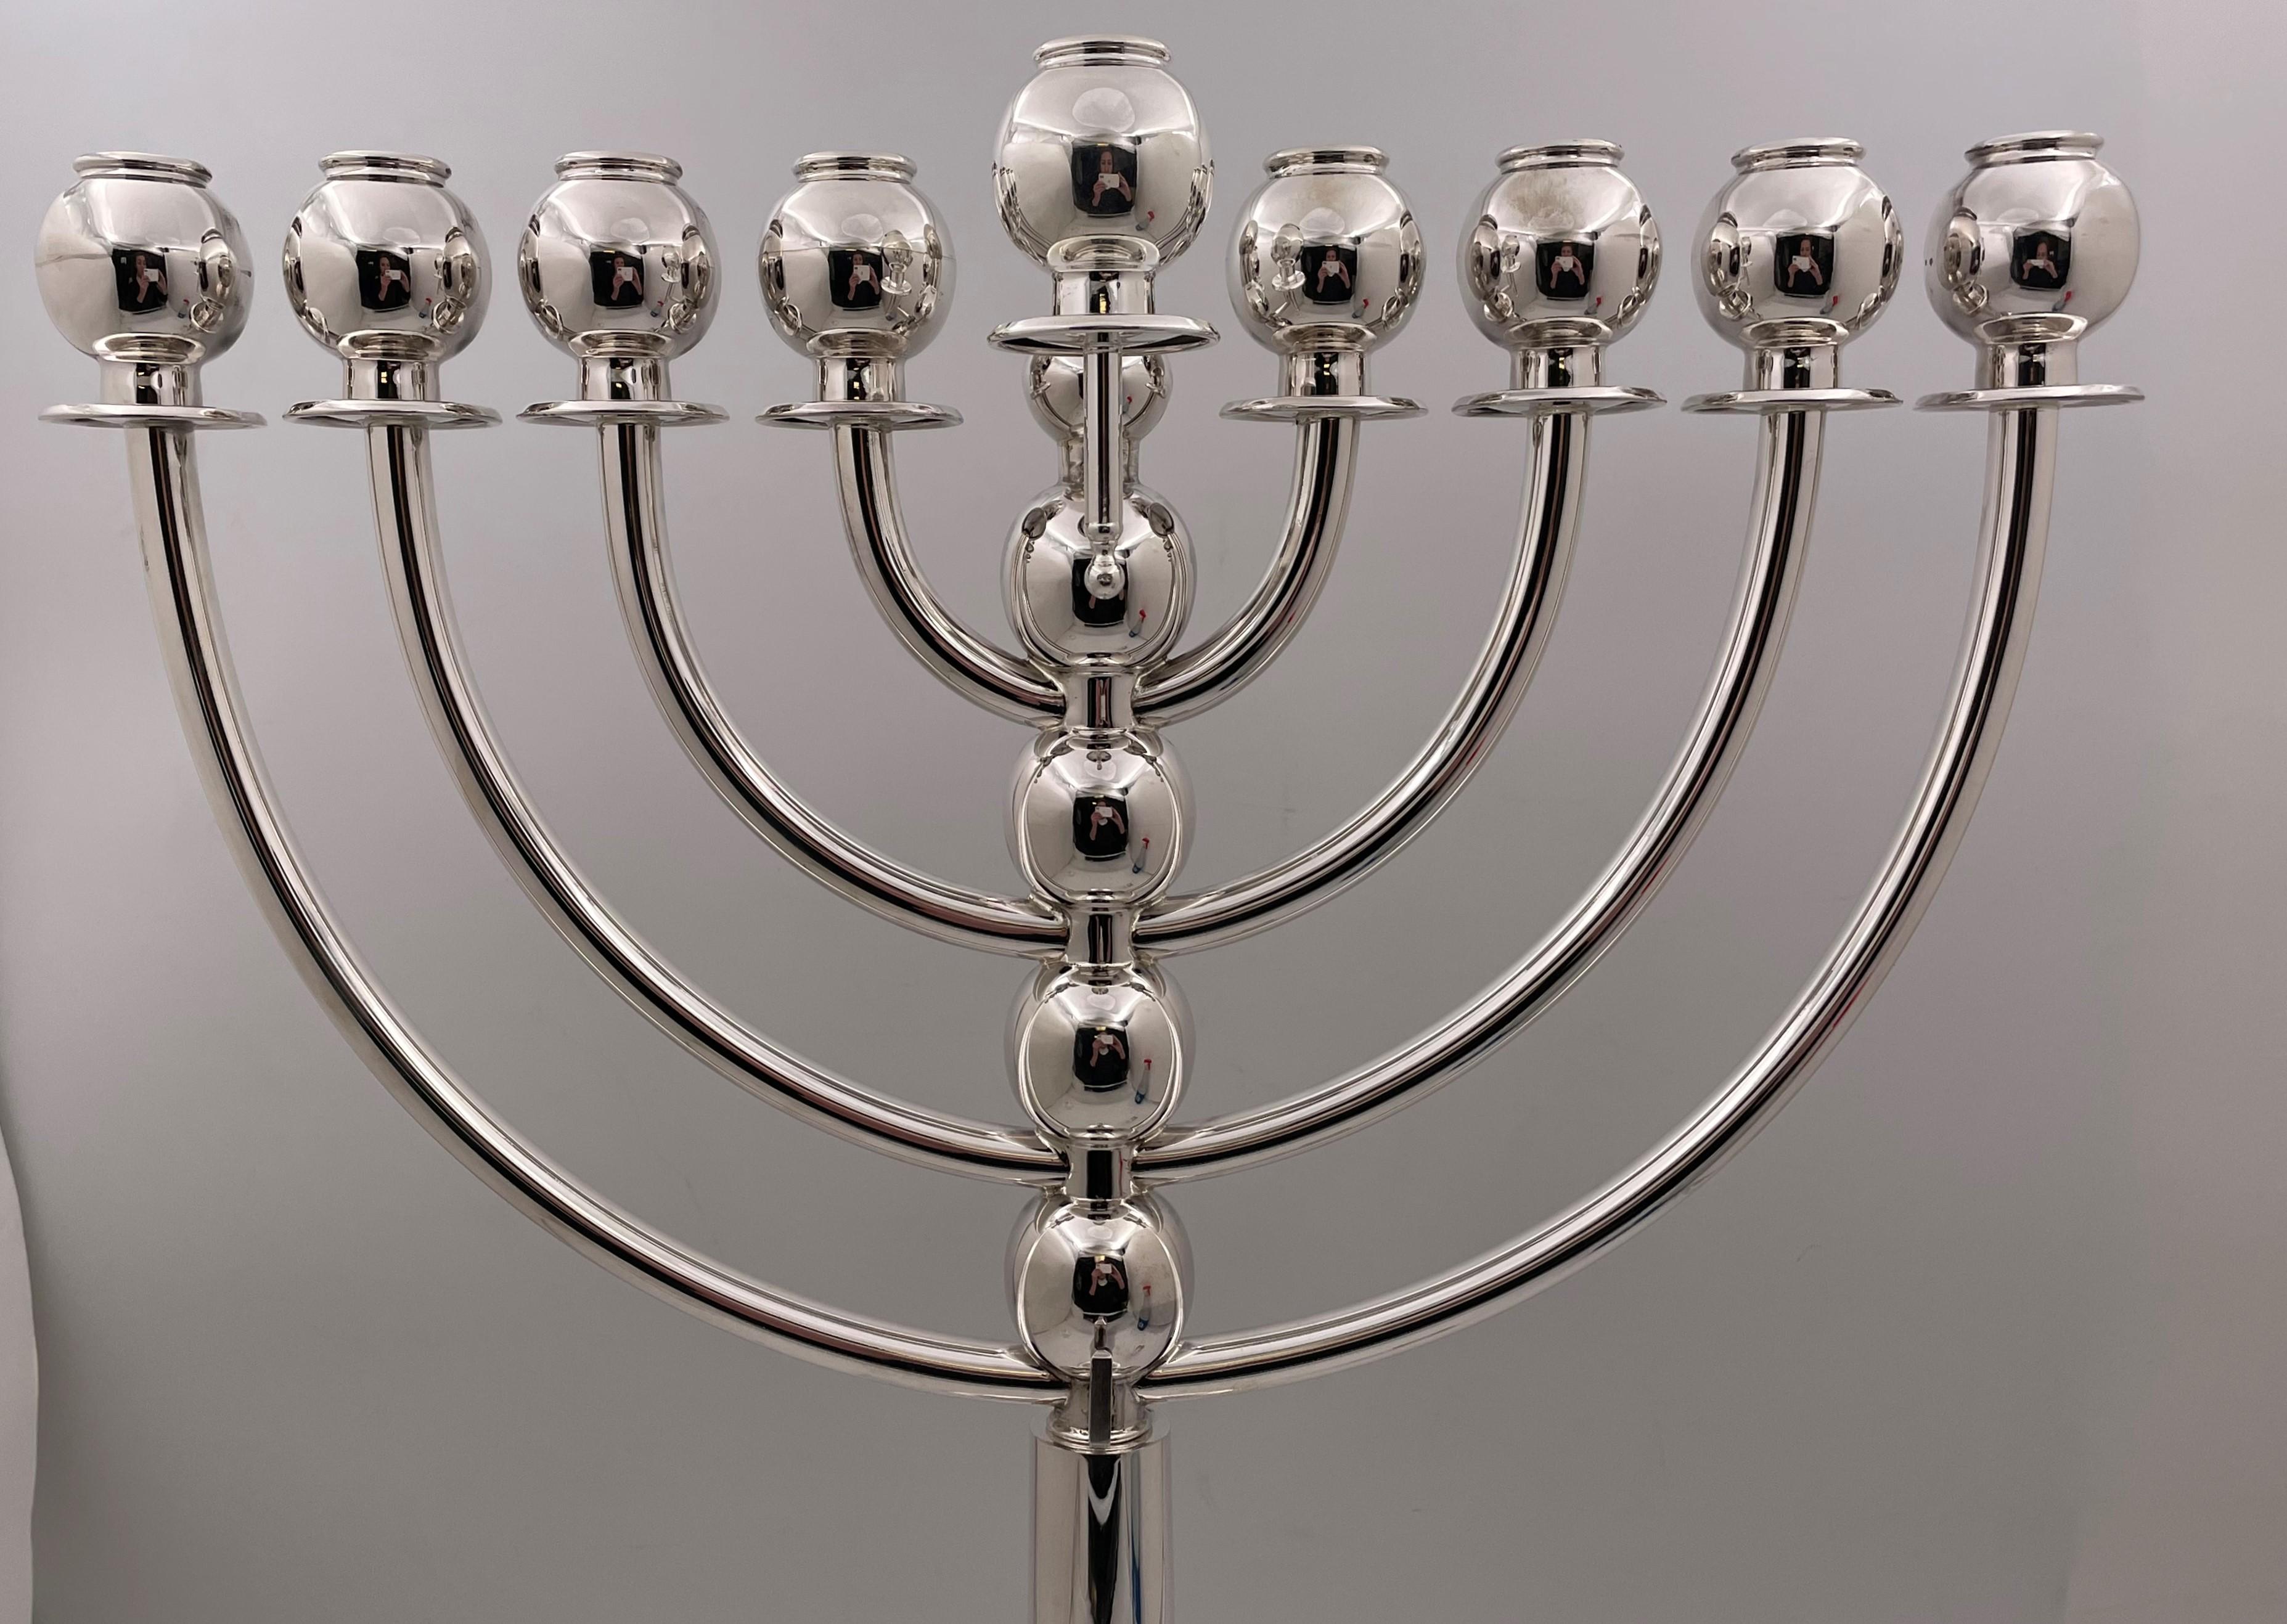 Monumental, sterling silver menorah in Mid-Century Modern style with an elegant, curvilinear design, measuring 21 1/3'' in height by 16 3/4'' from arm to arm by 6'' in depth, as well as an oil pitcher measuring 3 3/4'' in height. Total weight is